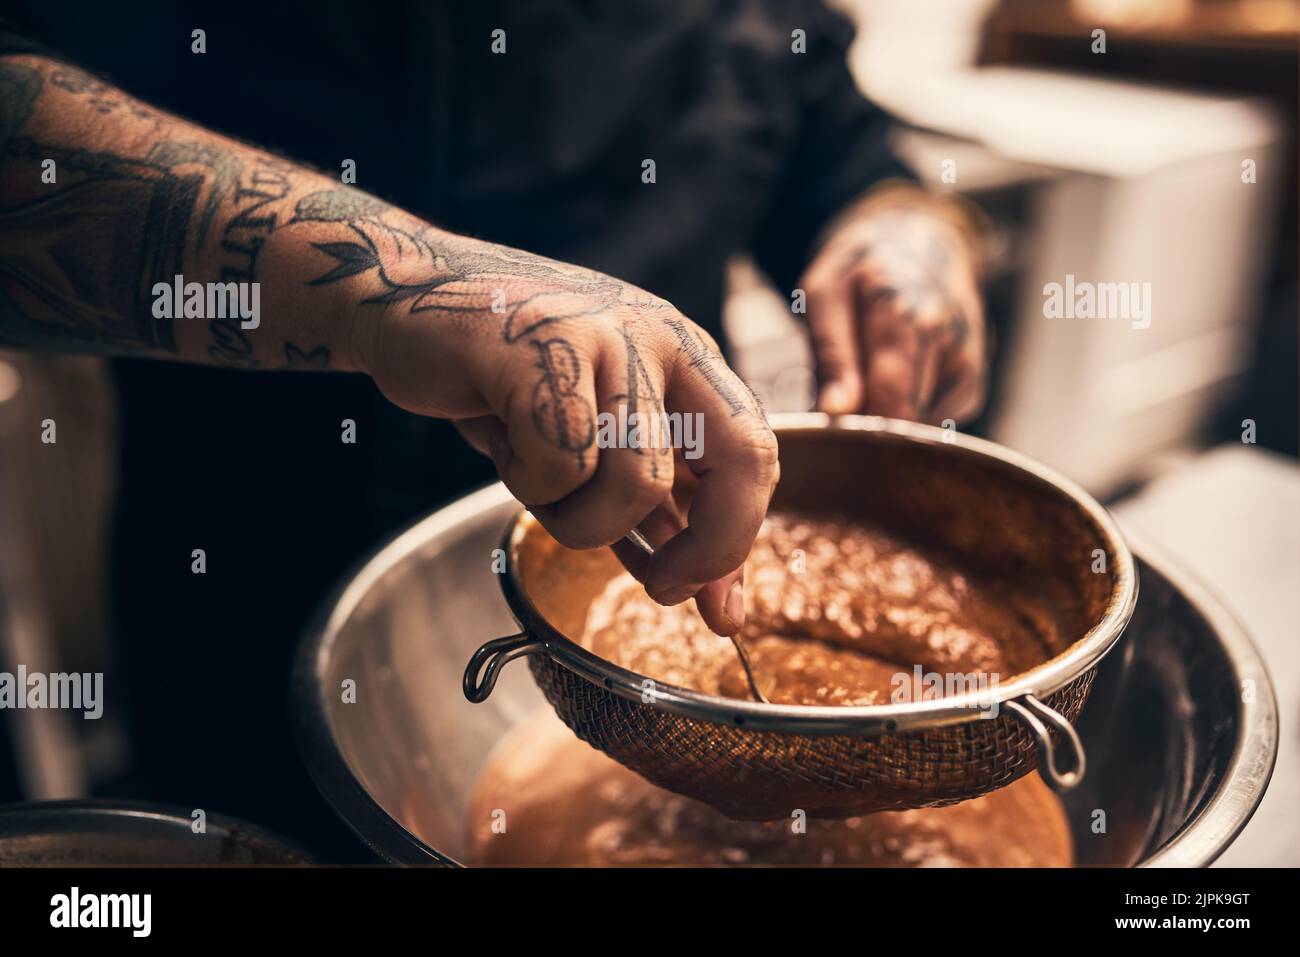 The best food is made with hard work. Closeup of a unrecognisable chefs tattooed hands straining food into a bowl in kitchen of a restaurant. Stock Photo